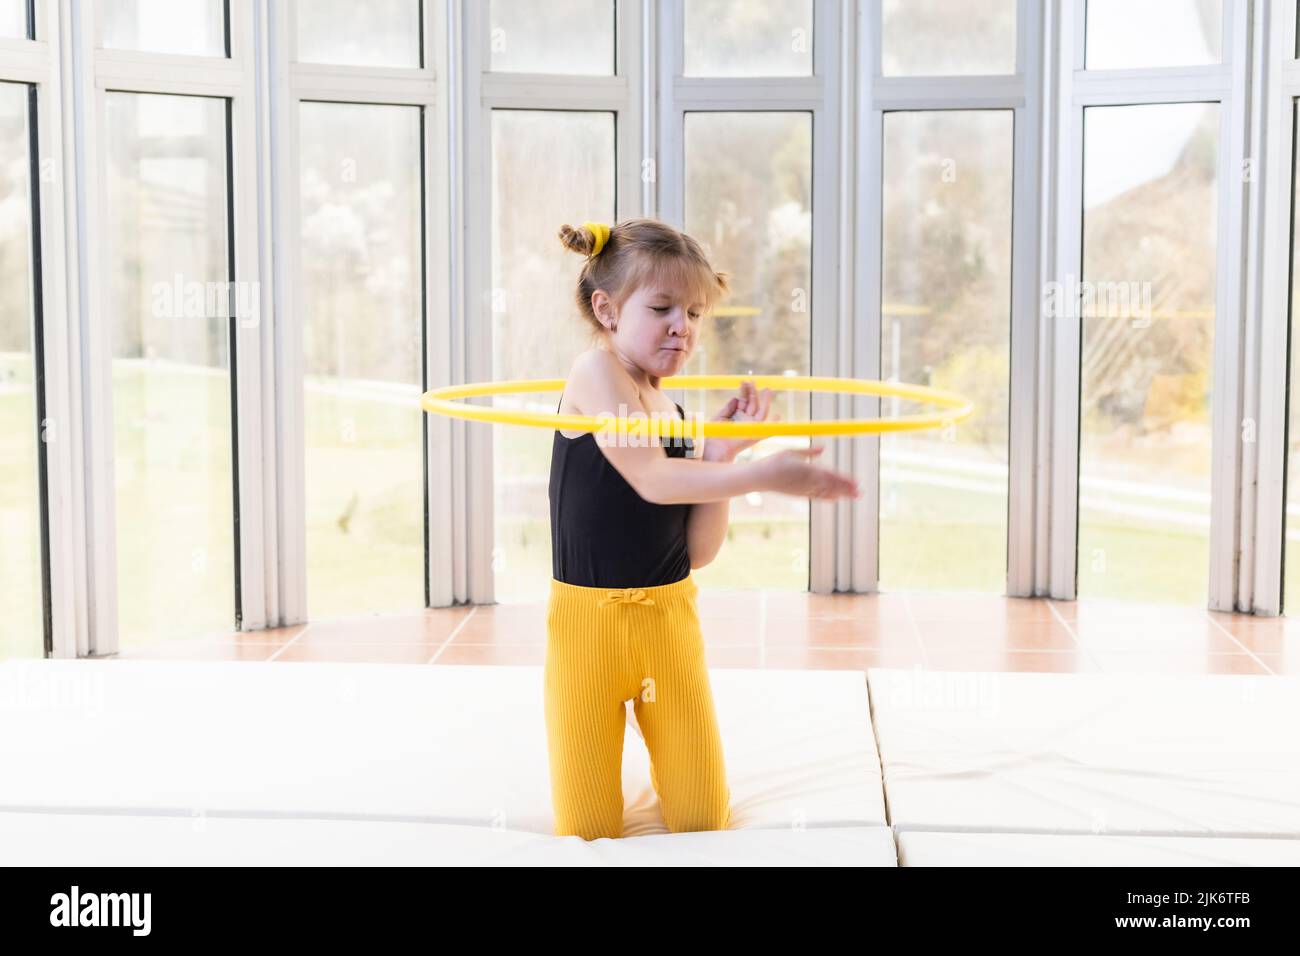 Little blonde girl with piggy tails playing with hula hoop Stock Photo